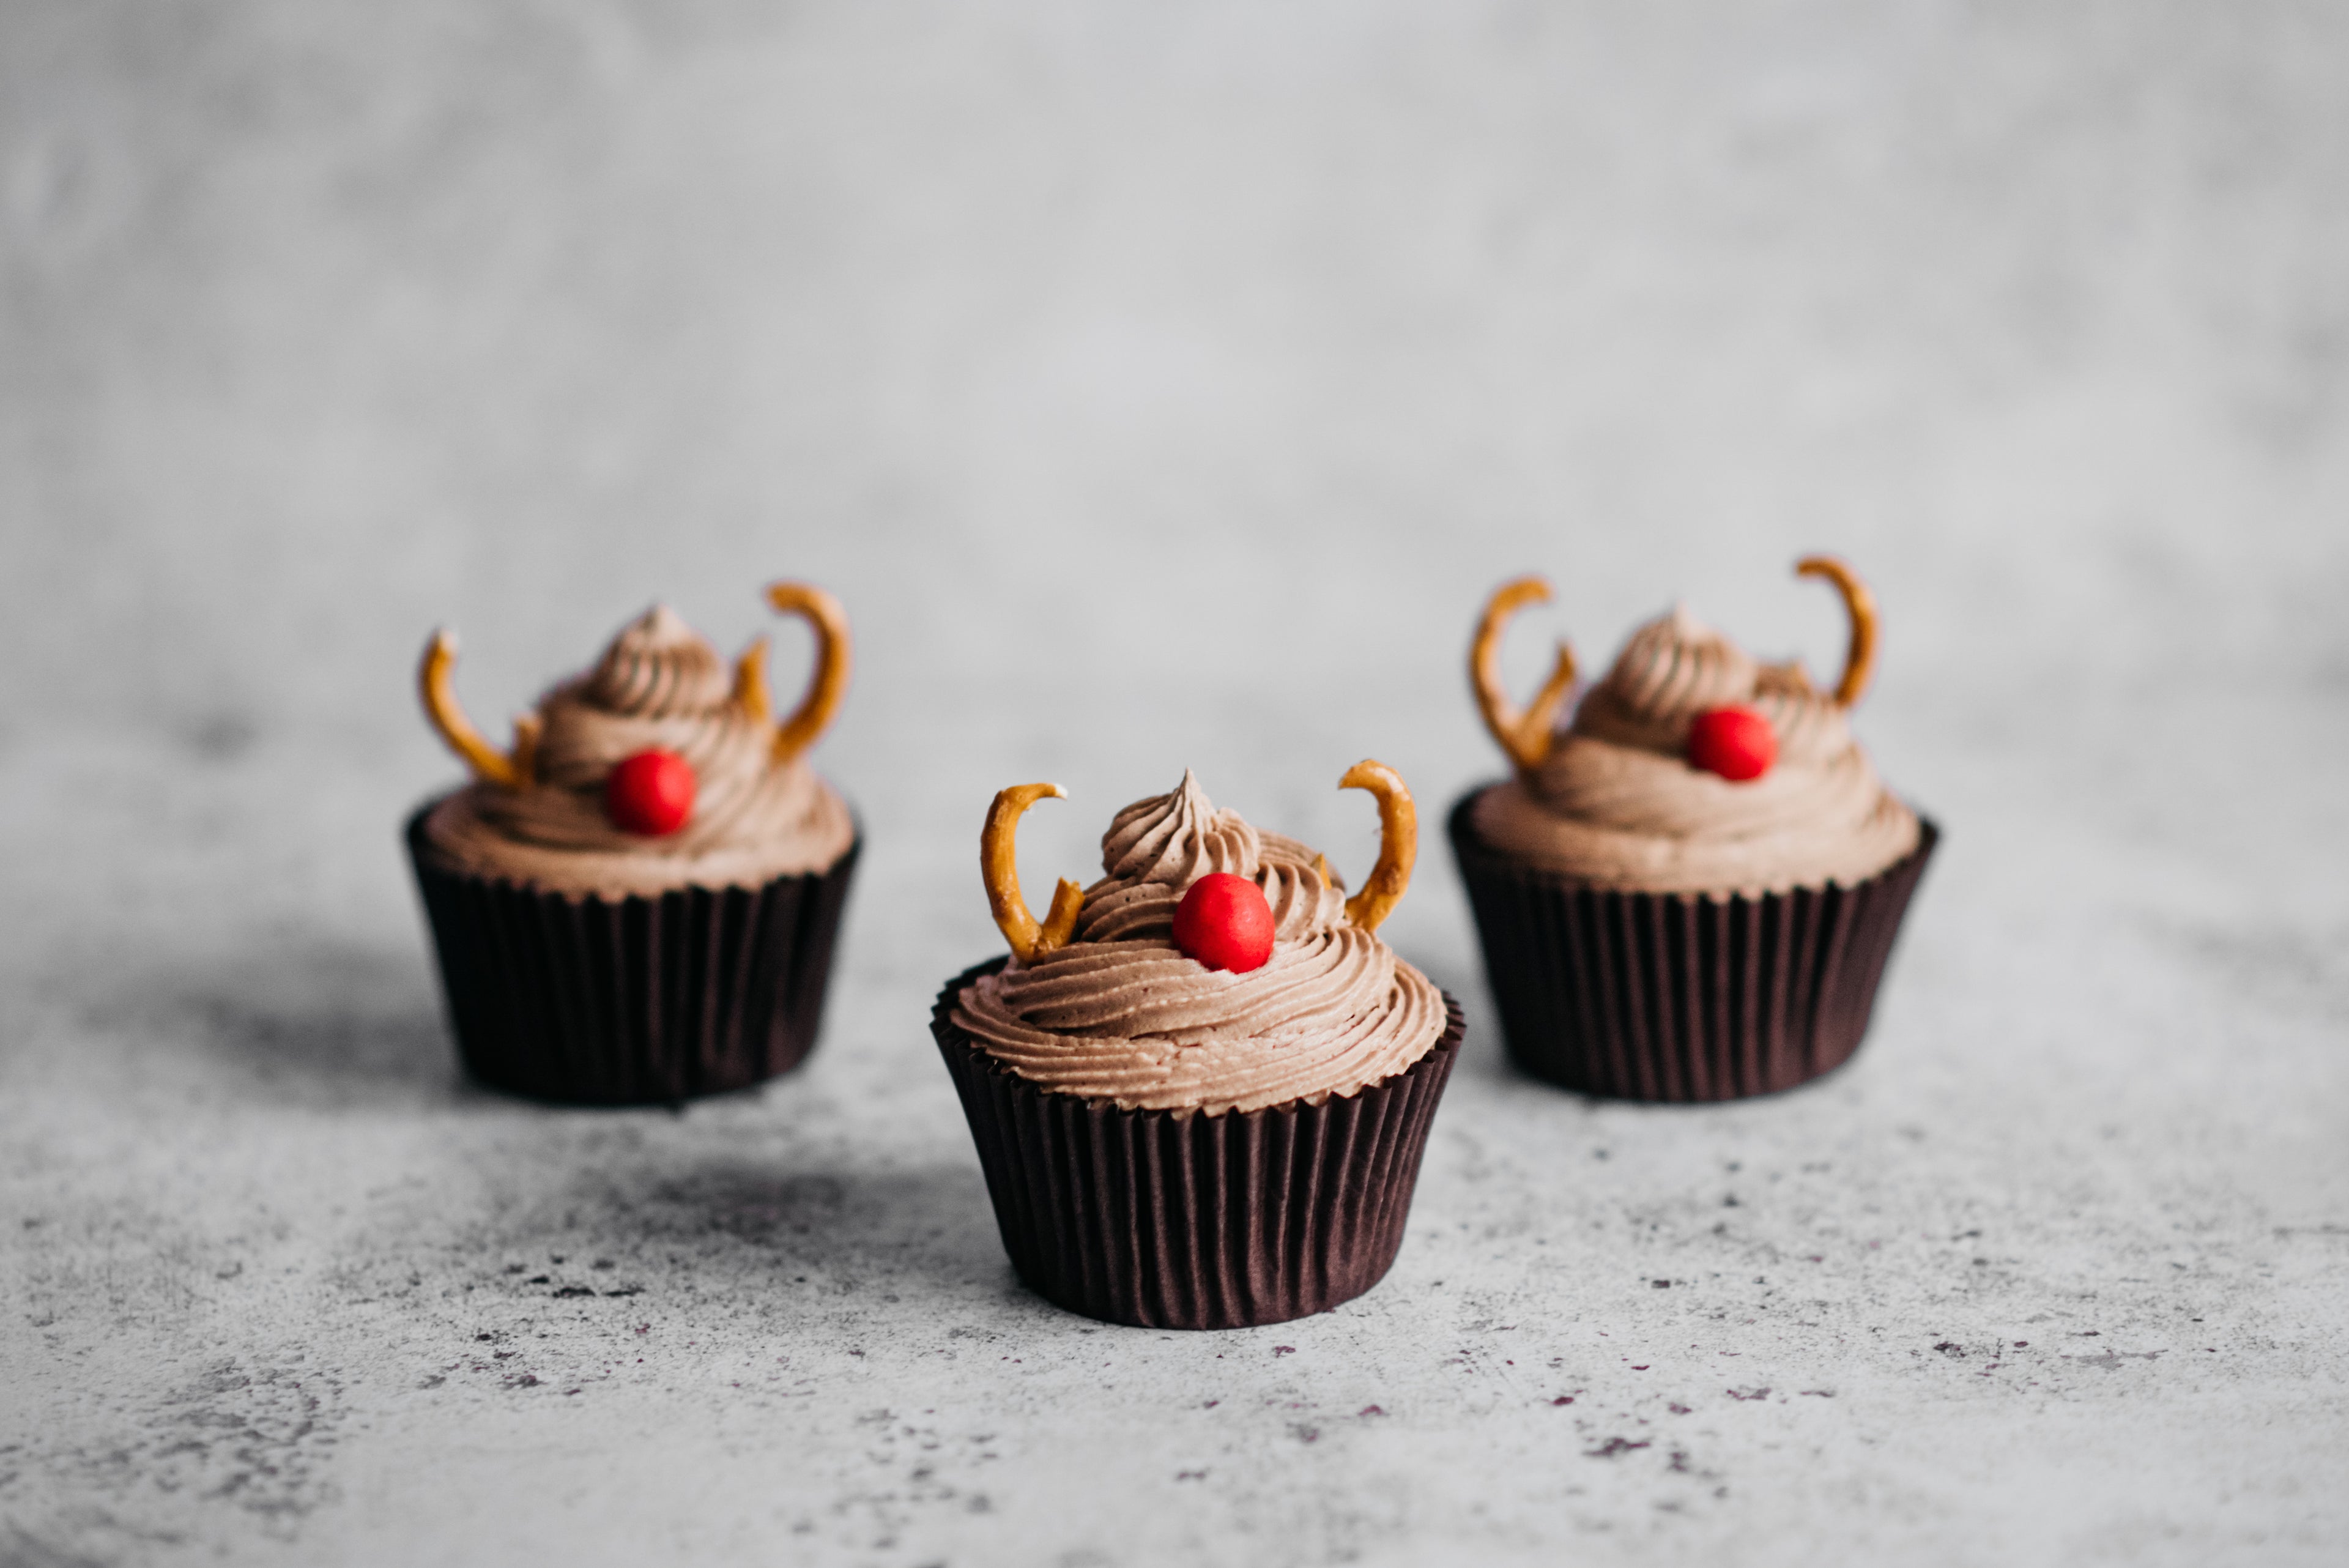 Close up of Reindeer Cupcakes decorated with pretzels and red sweets as a nose